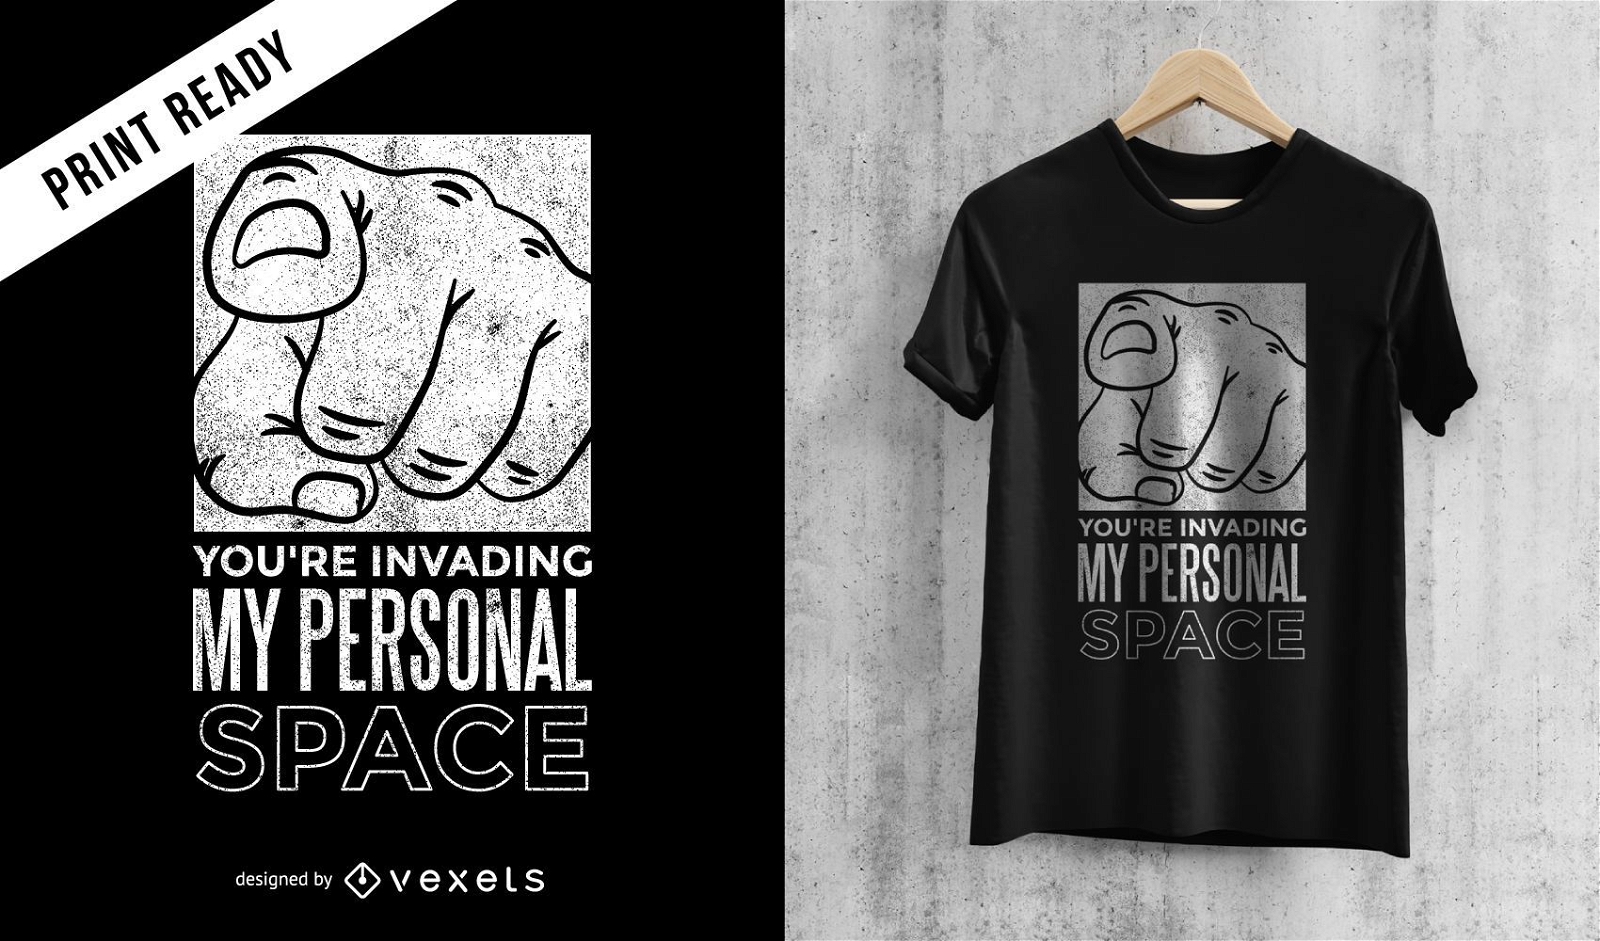 Personal space t-shirt design